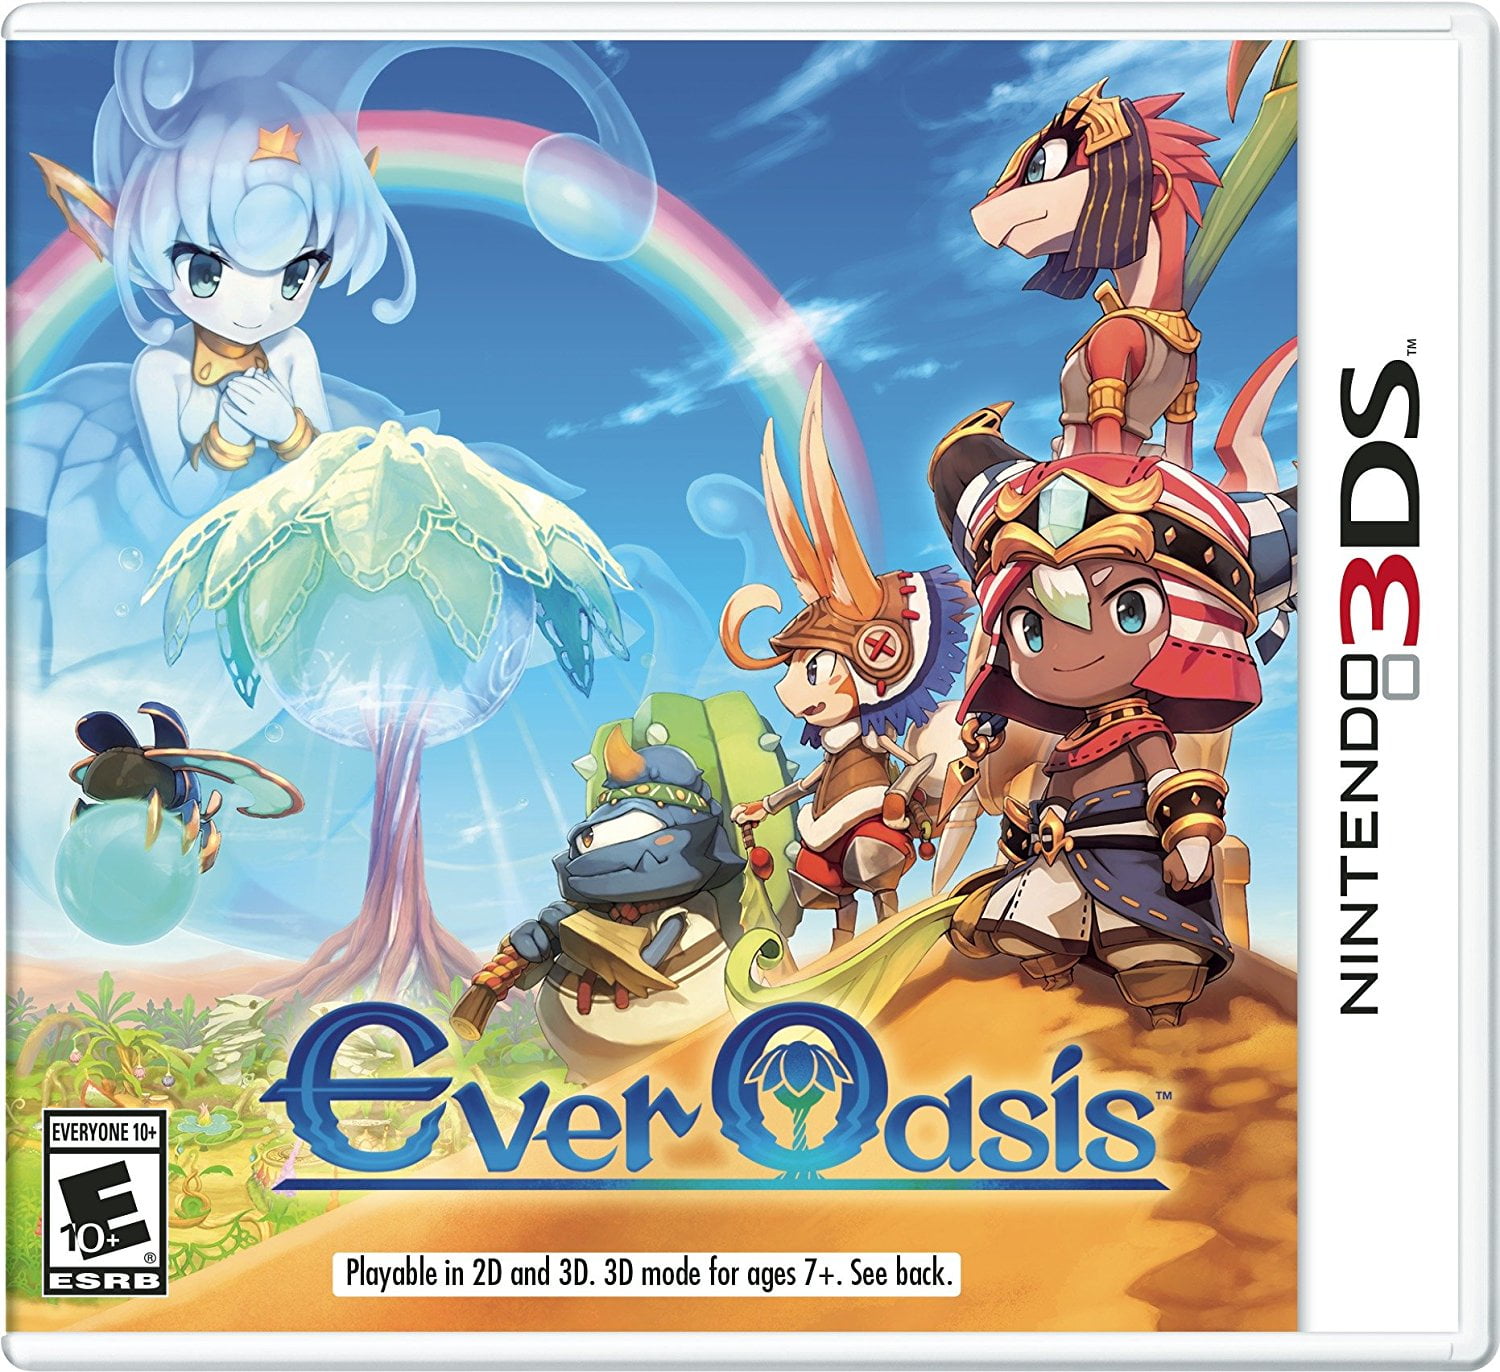 Gamecentral - ** New Stock/Restock ** 3DS Ever Oasis (US)